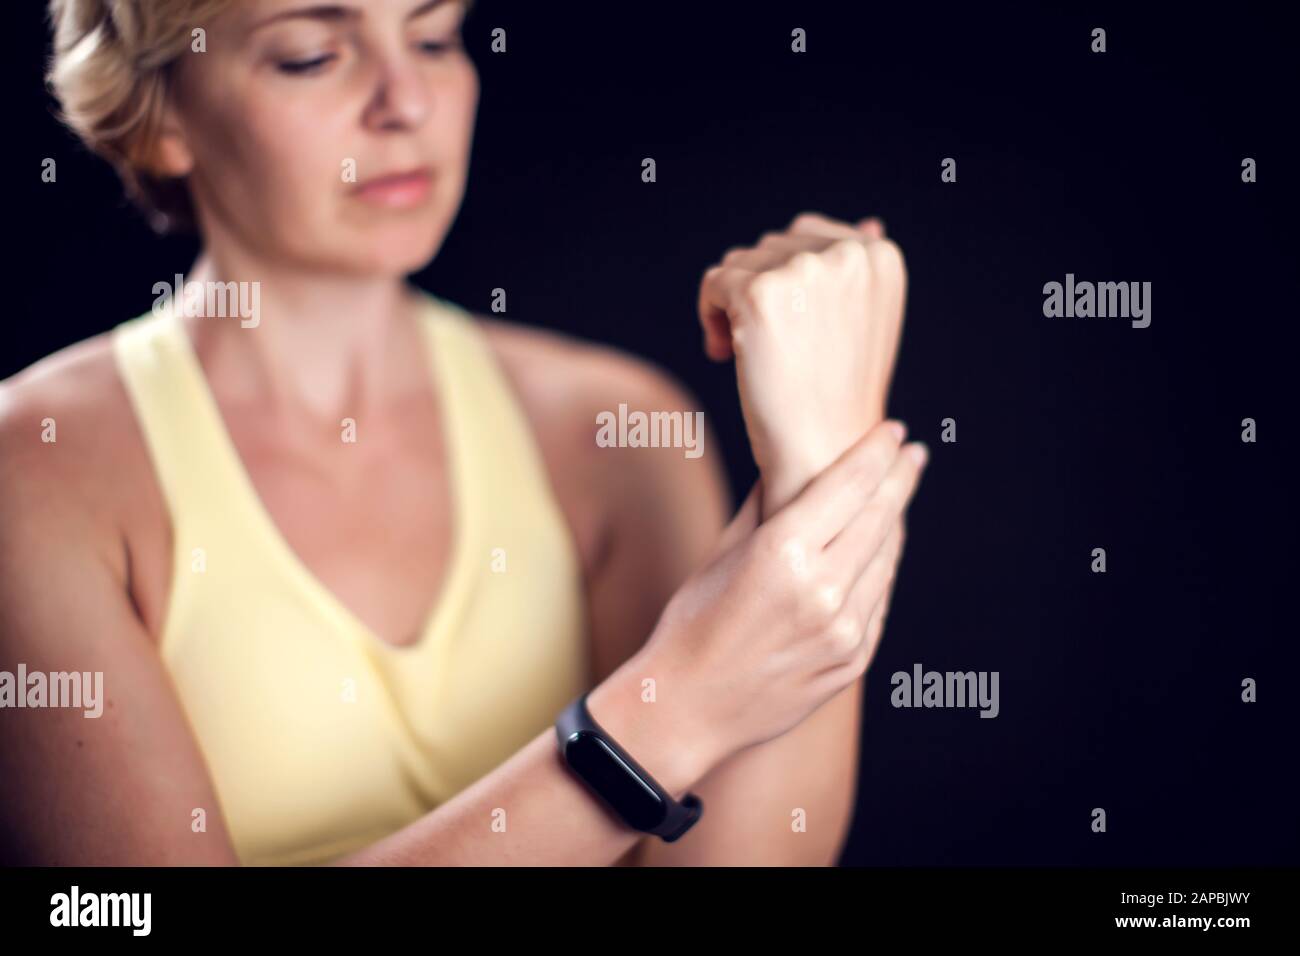 Woman with short blond hair feeling strong arm pain. Fitness and healthcare concept Stock Photo